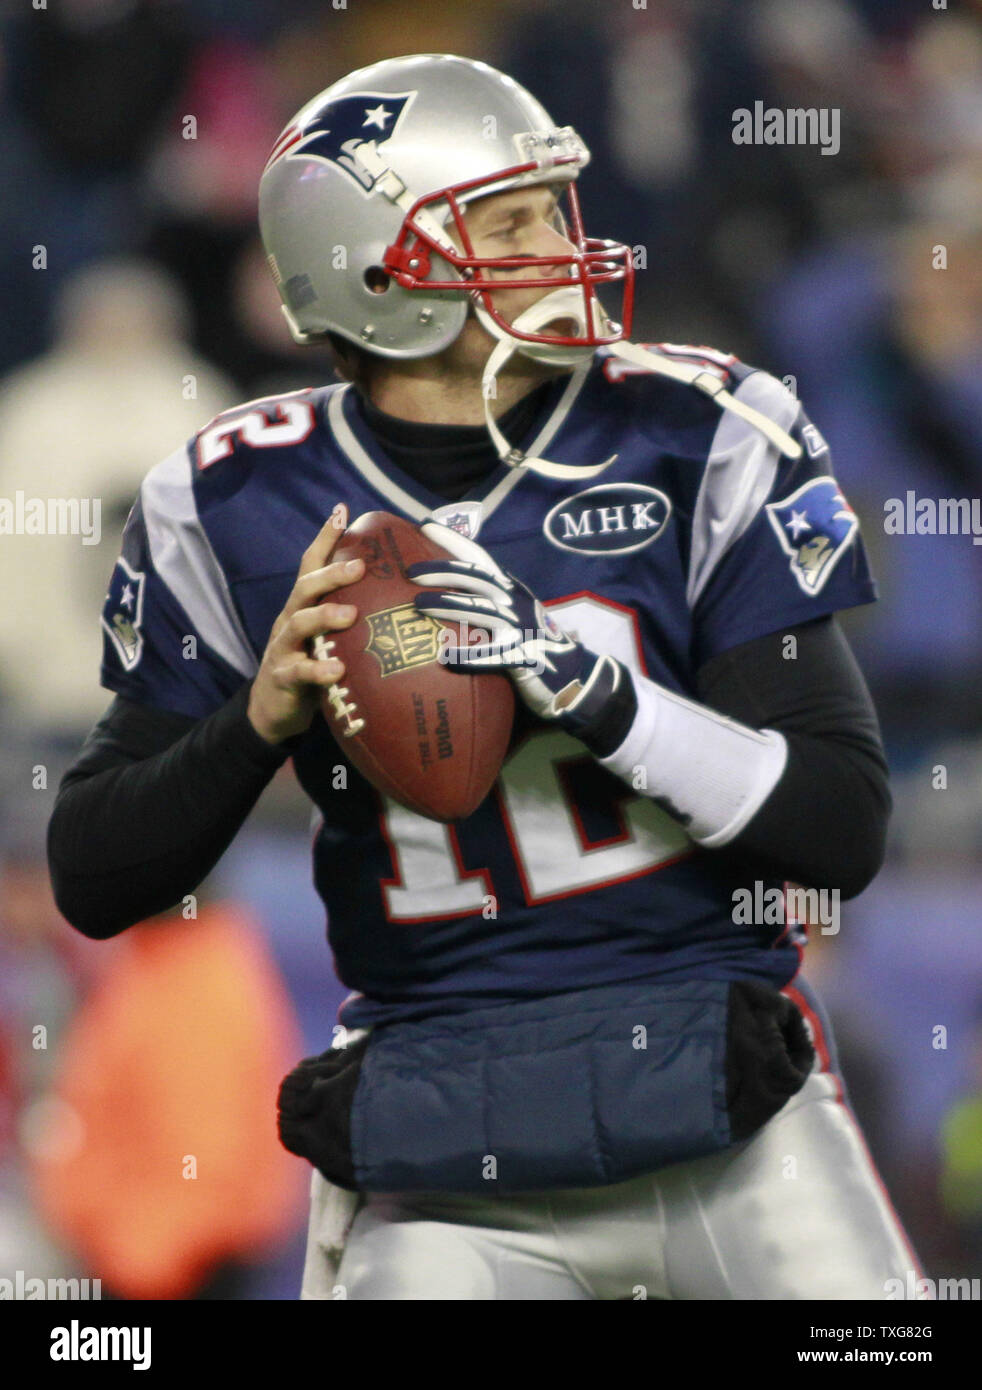 New England Patriots quarterback Tom Brady warms up before taking on the Denver Broncos in the AFC divisional playoff game at Gillette Stadium in Foxboro, Massachusetts on January 14, 2012.    UPI/Matthew Healey Stock Photo